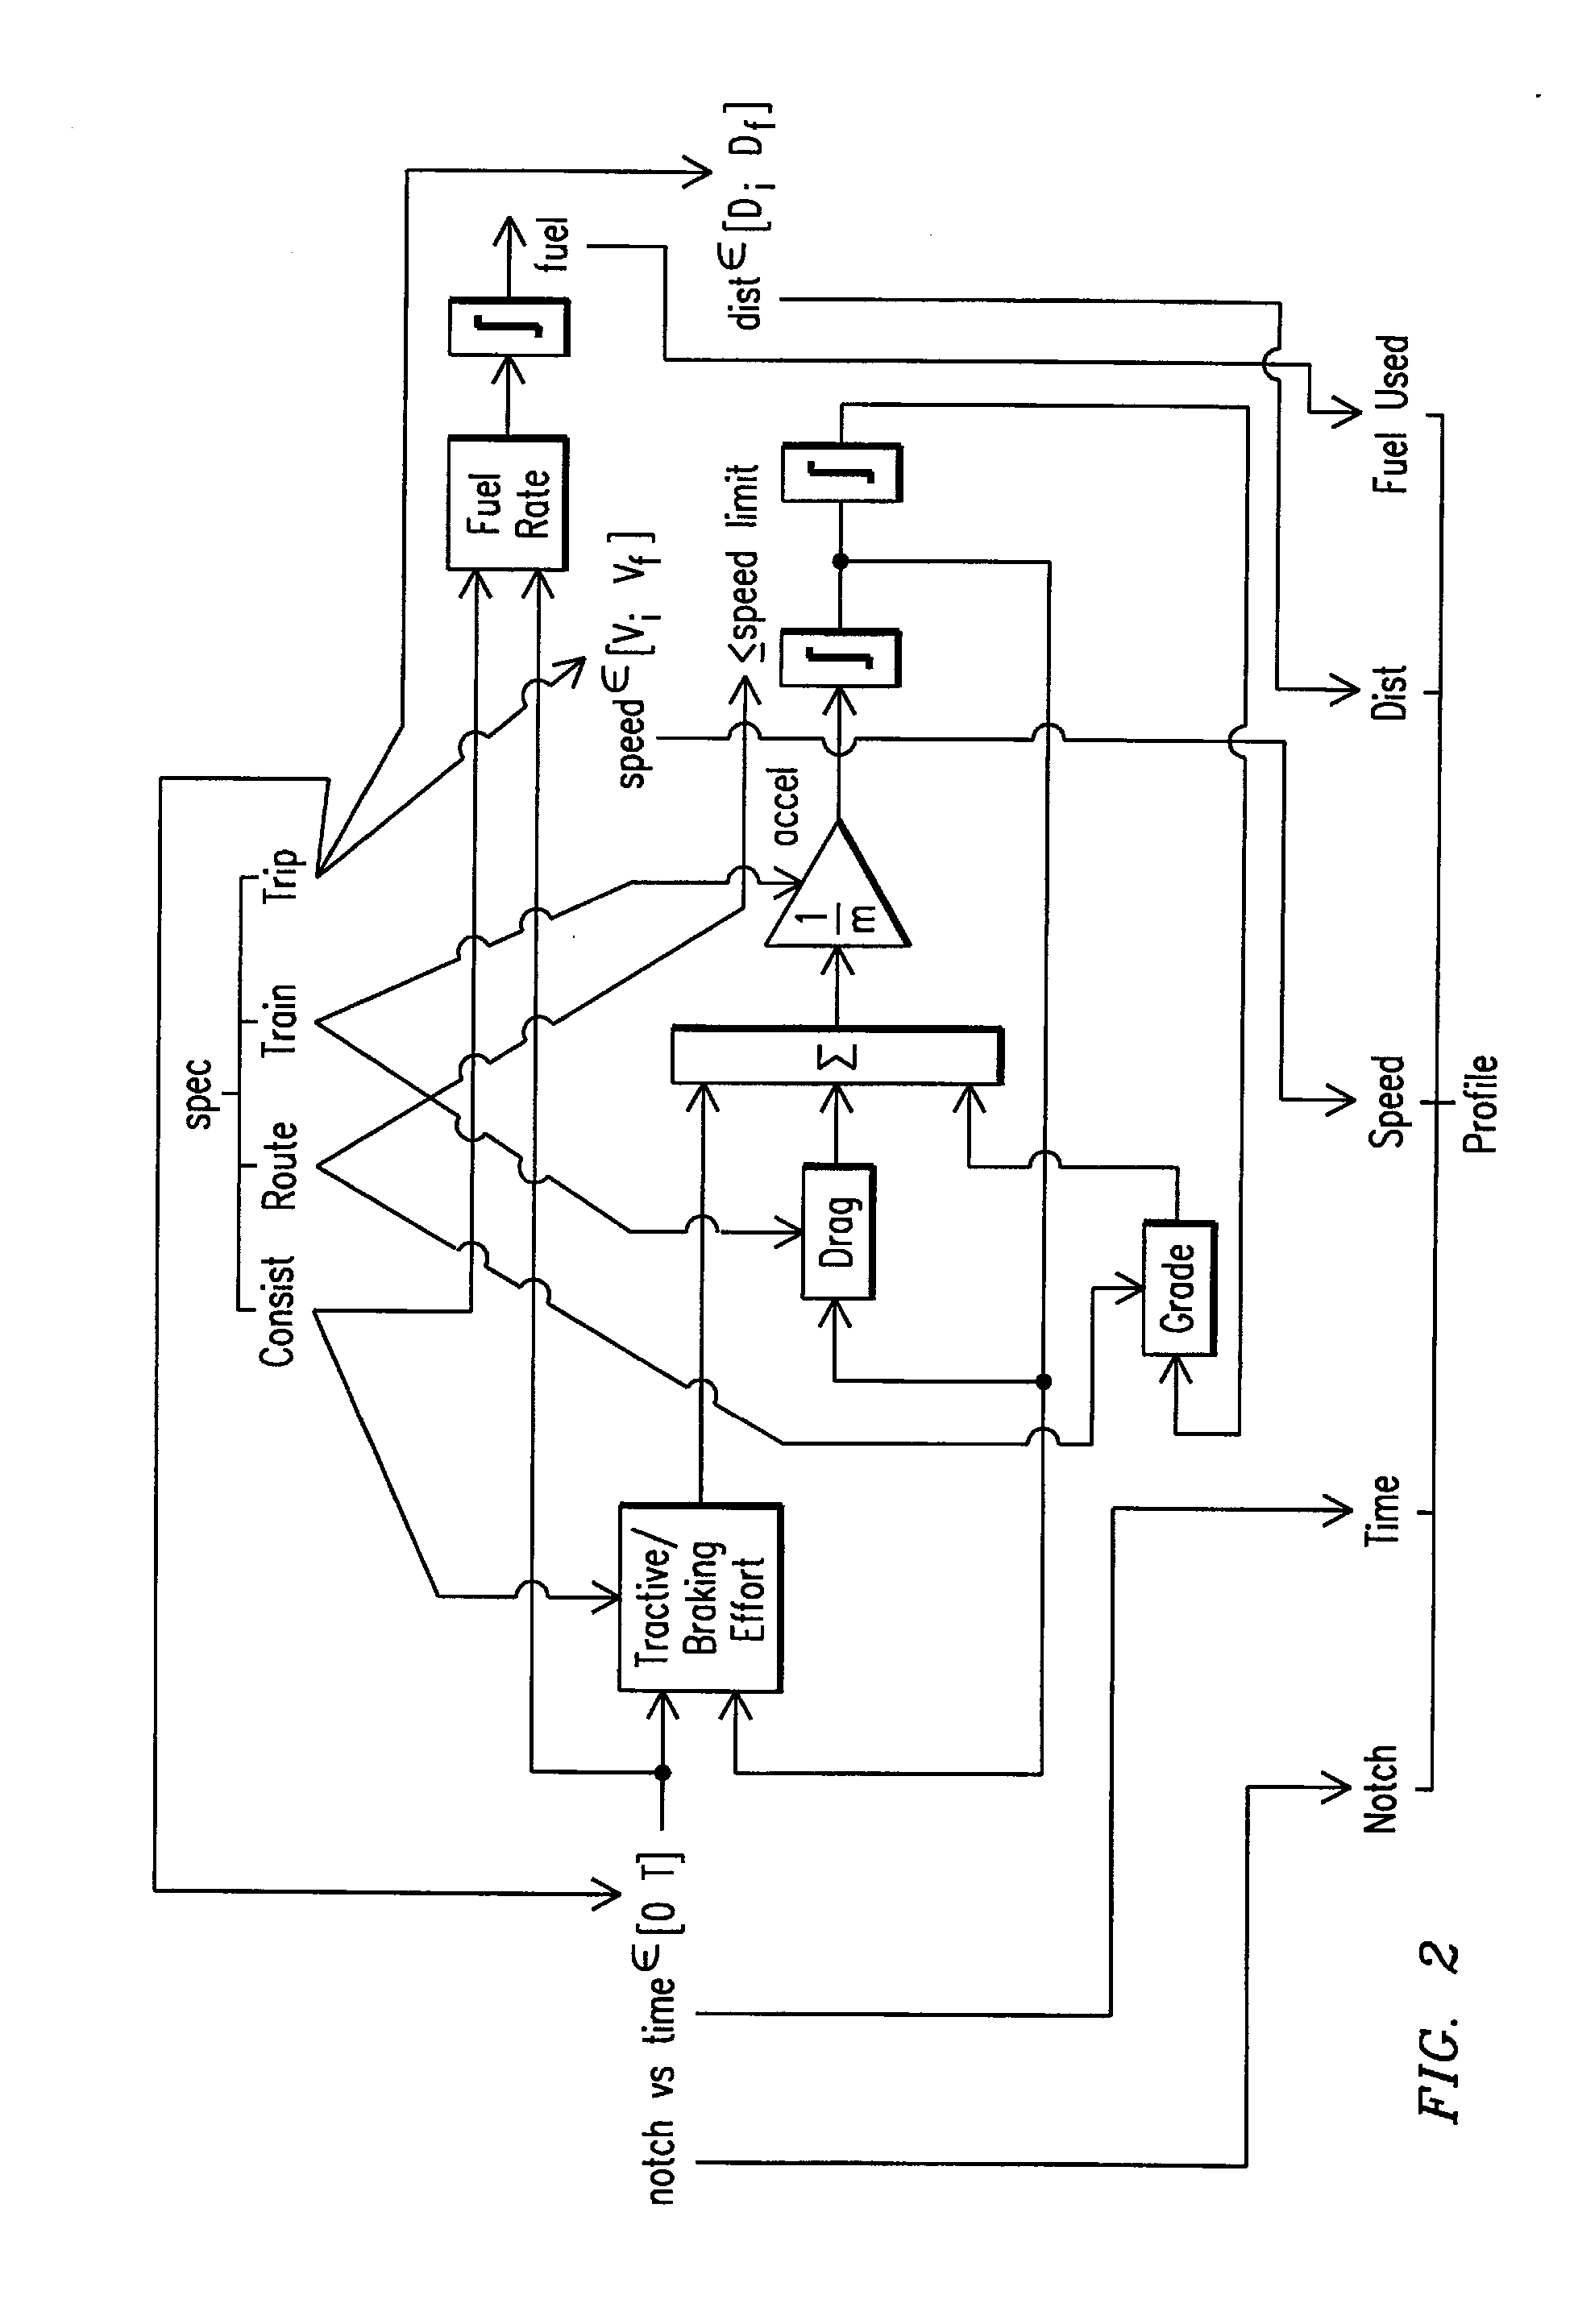 System and method for optimizing parameters of multiple rail vehicles operating over multiple intersecting railroad networks